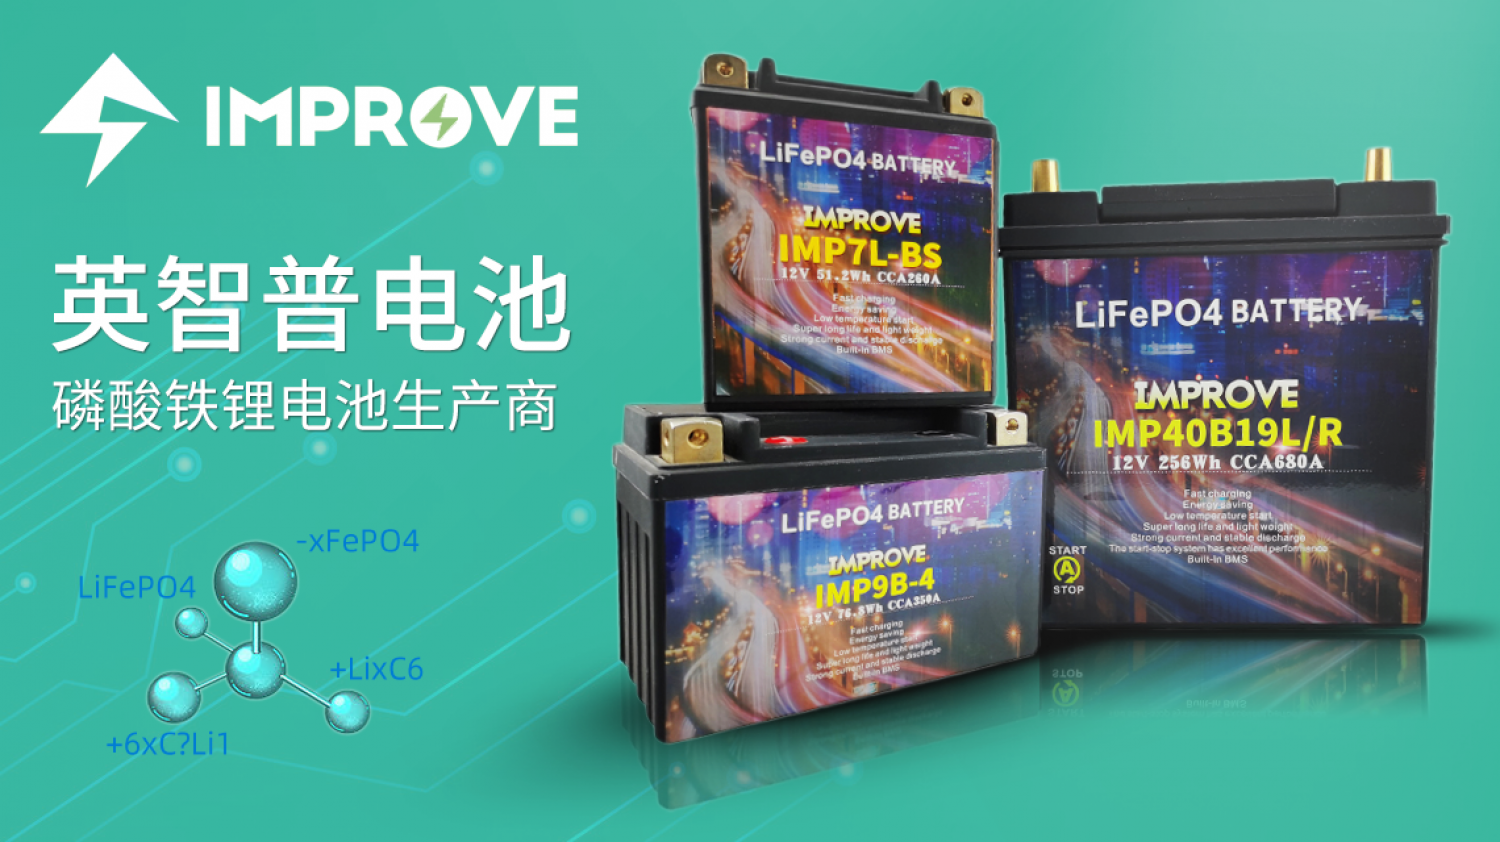 Three Major Application Advantages of Lithium Iron Phosphate Batteries Used in the Communications Industry--IMPROVE BATTERY